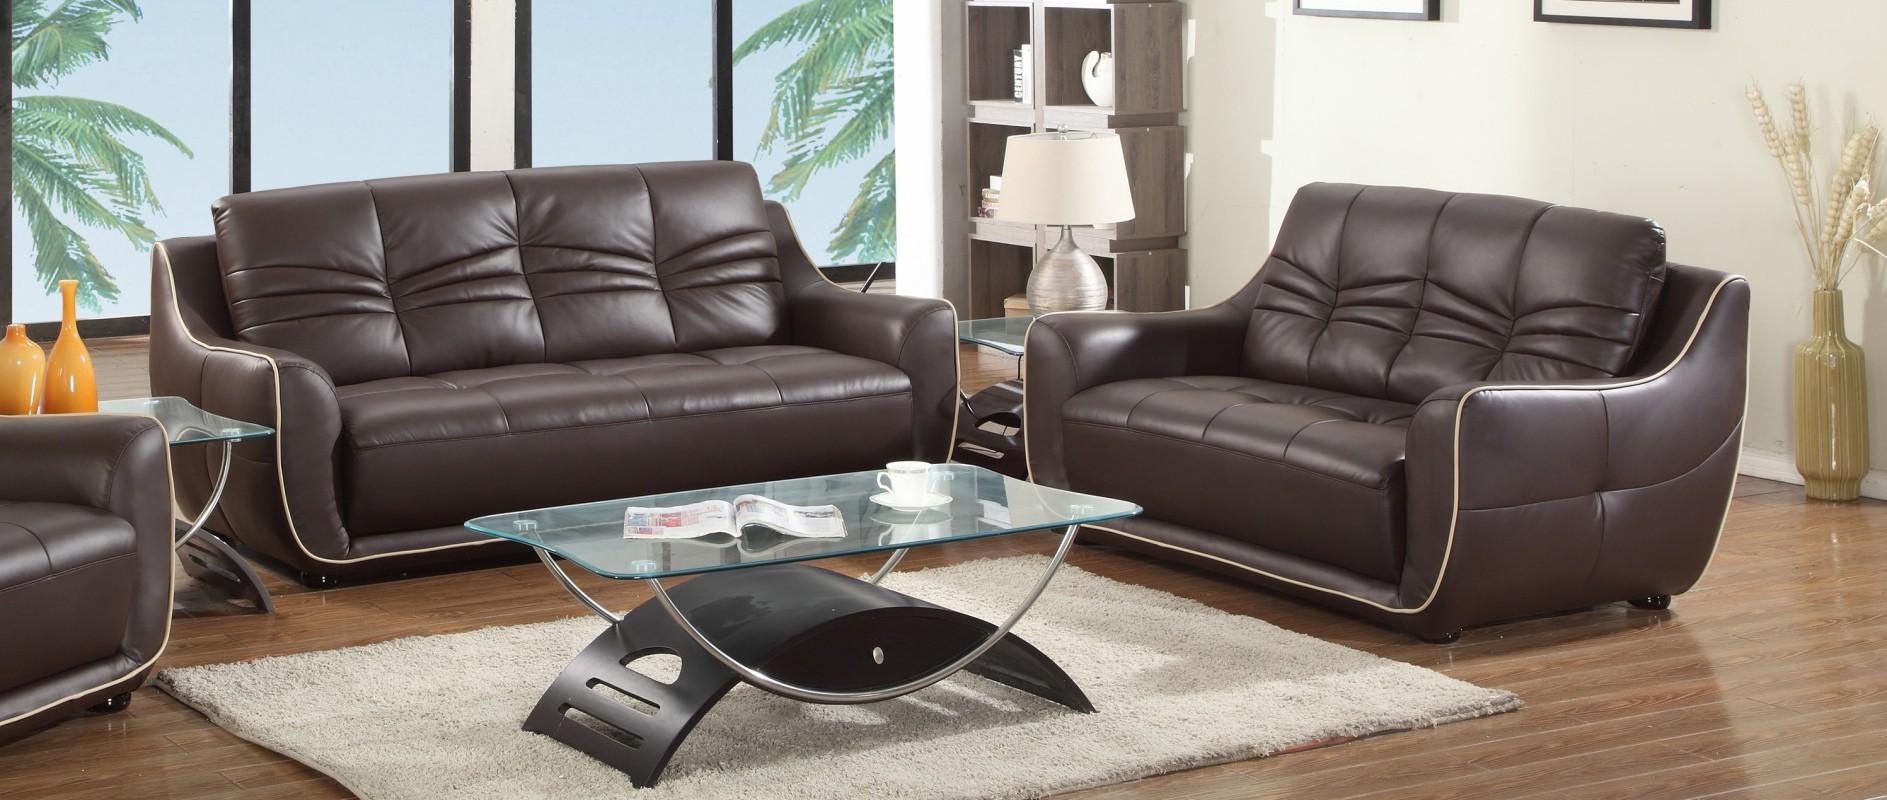 Contemporary Sofa and Loveseat Set 2088 2088-BROWN-2PC in Brown Leather Air / Match